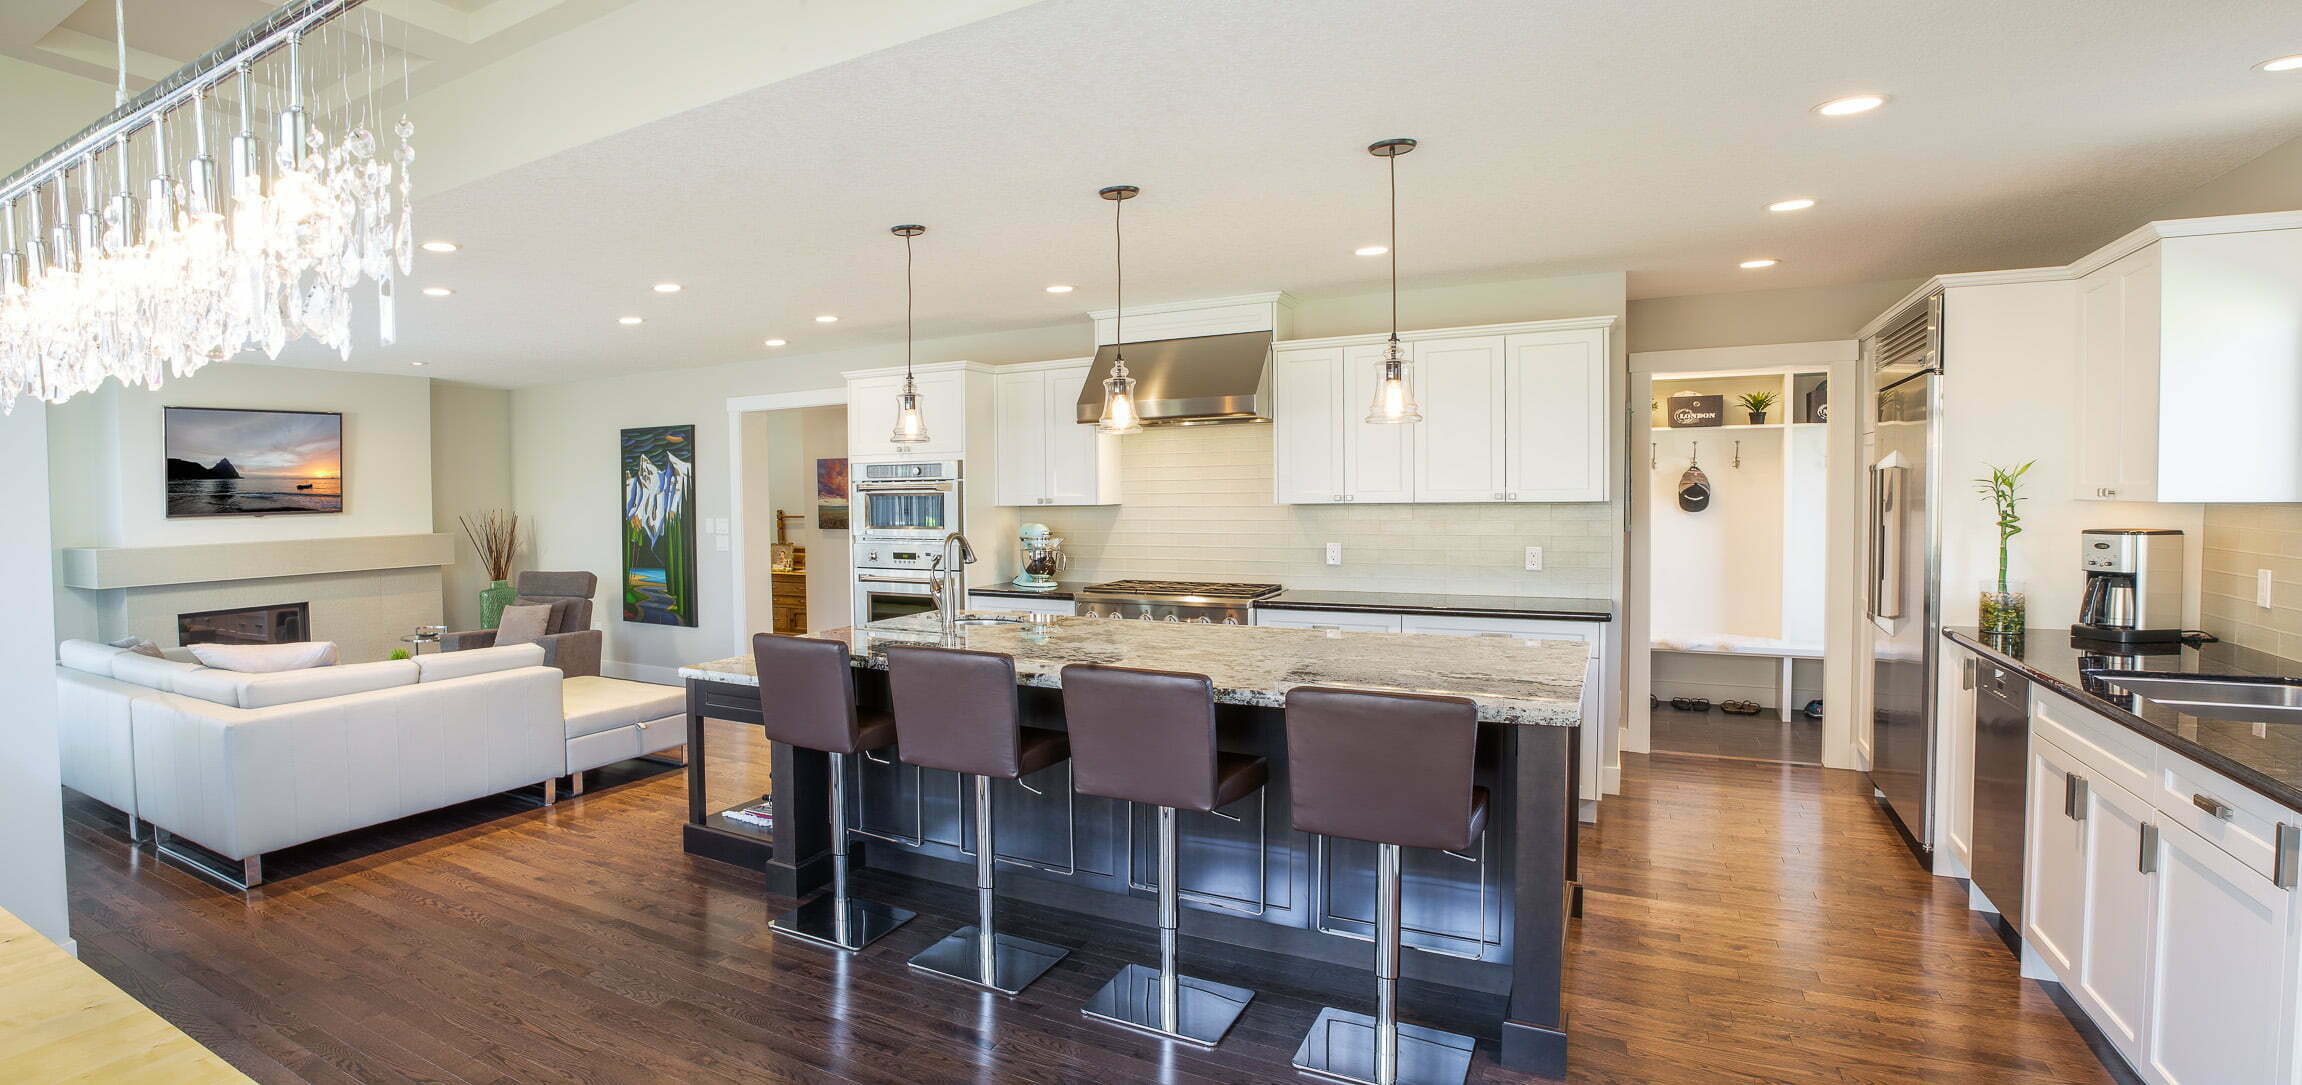 One Of The Most Reputable Calgary Custom Home Builders Holds Last Tour For 2013